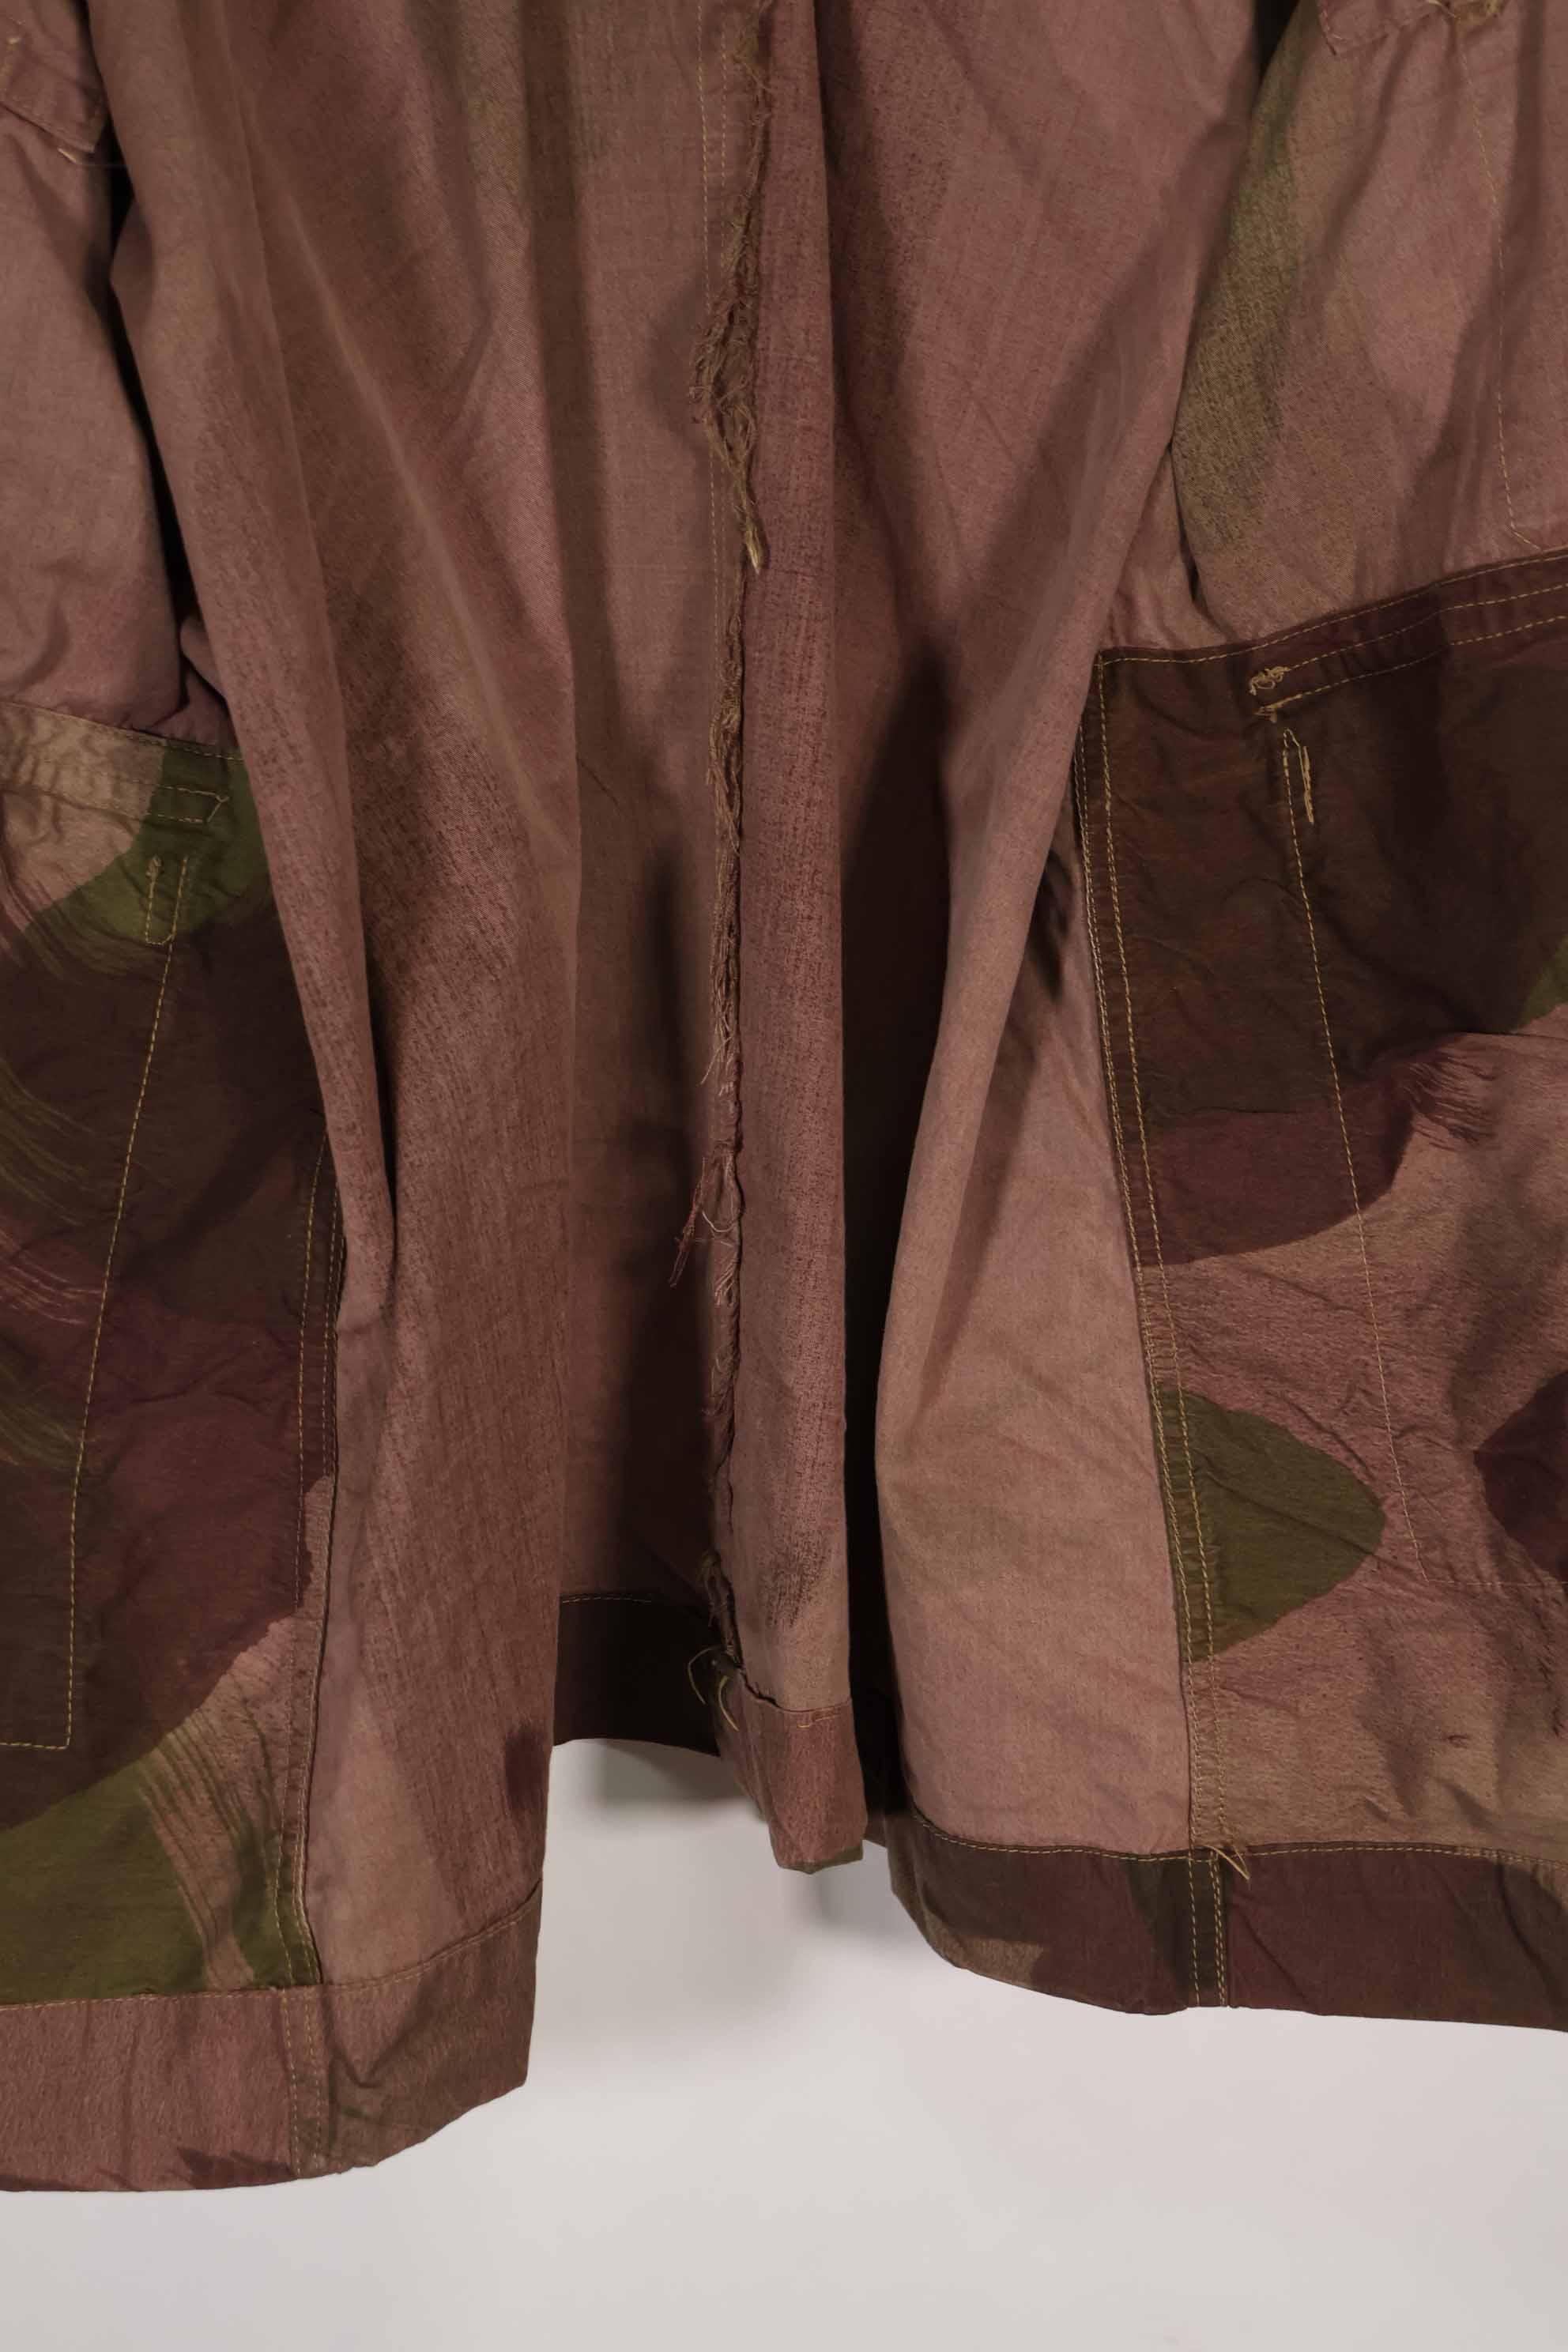 Real 1940s WWII British Army Windproof Camouflage Indochina War Zipper Custom Jacket Used